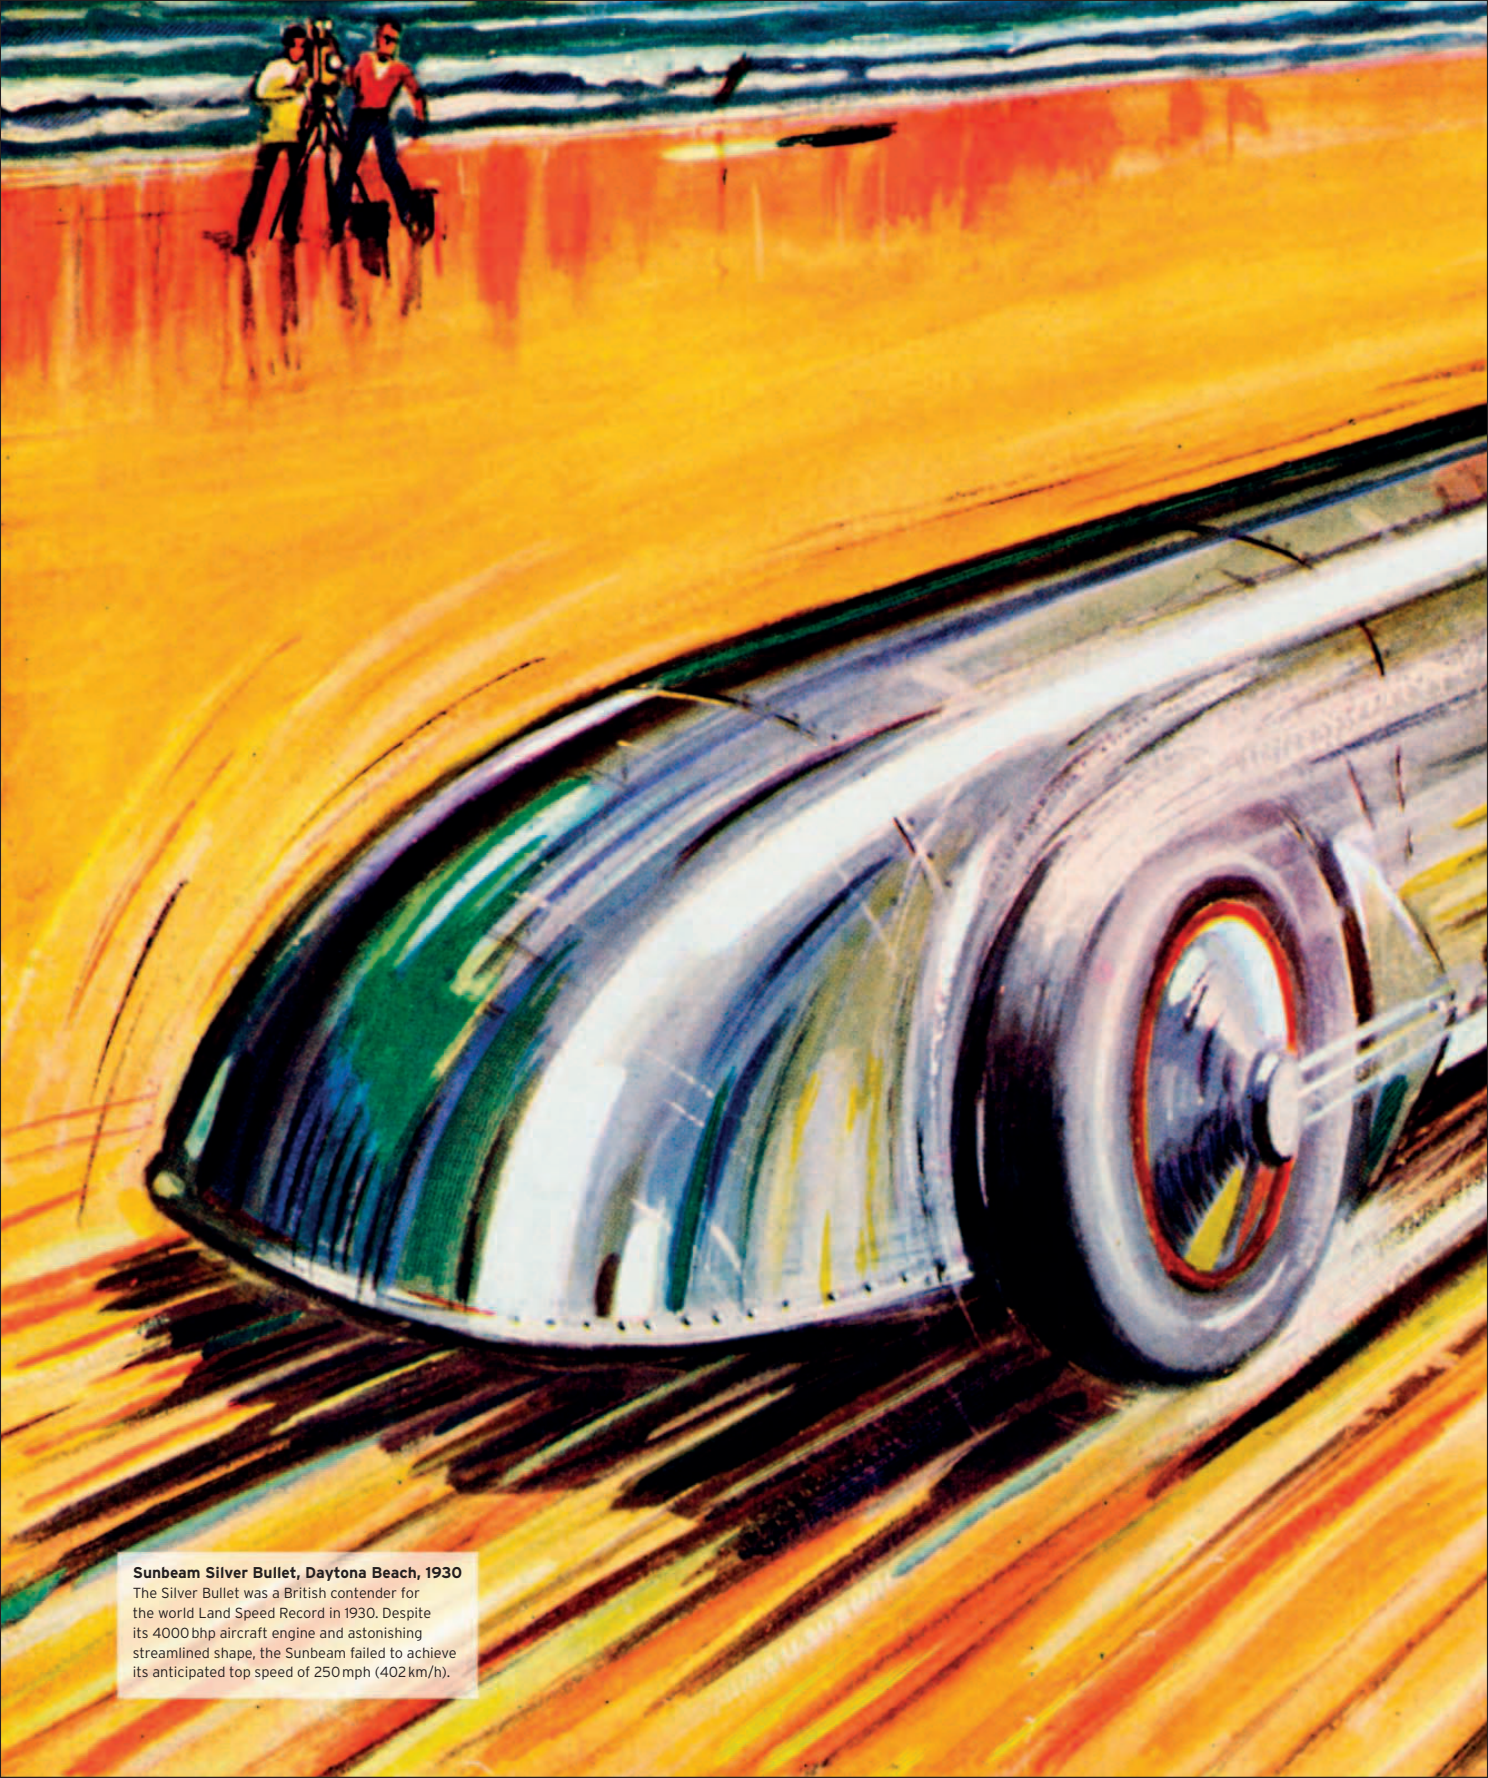 Car%20-%20The%20Definitive%20Visual%20History%20of%20the%20Automobile_092.png